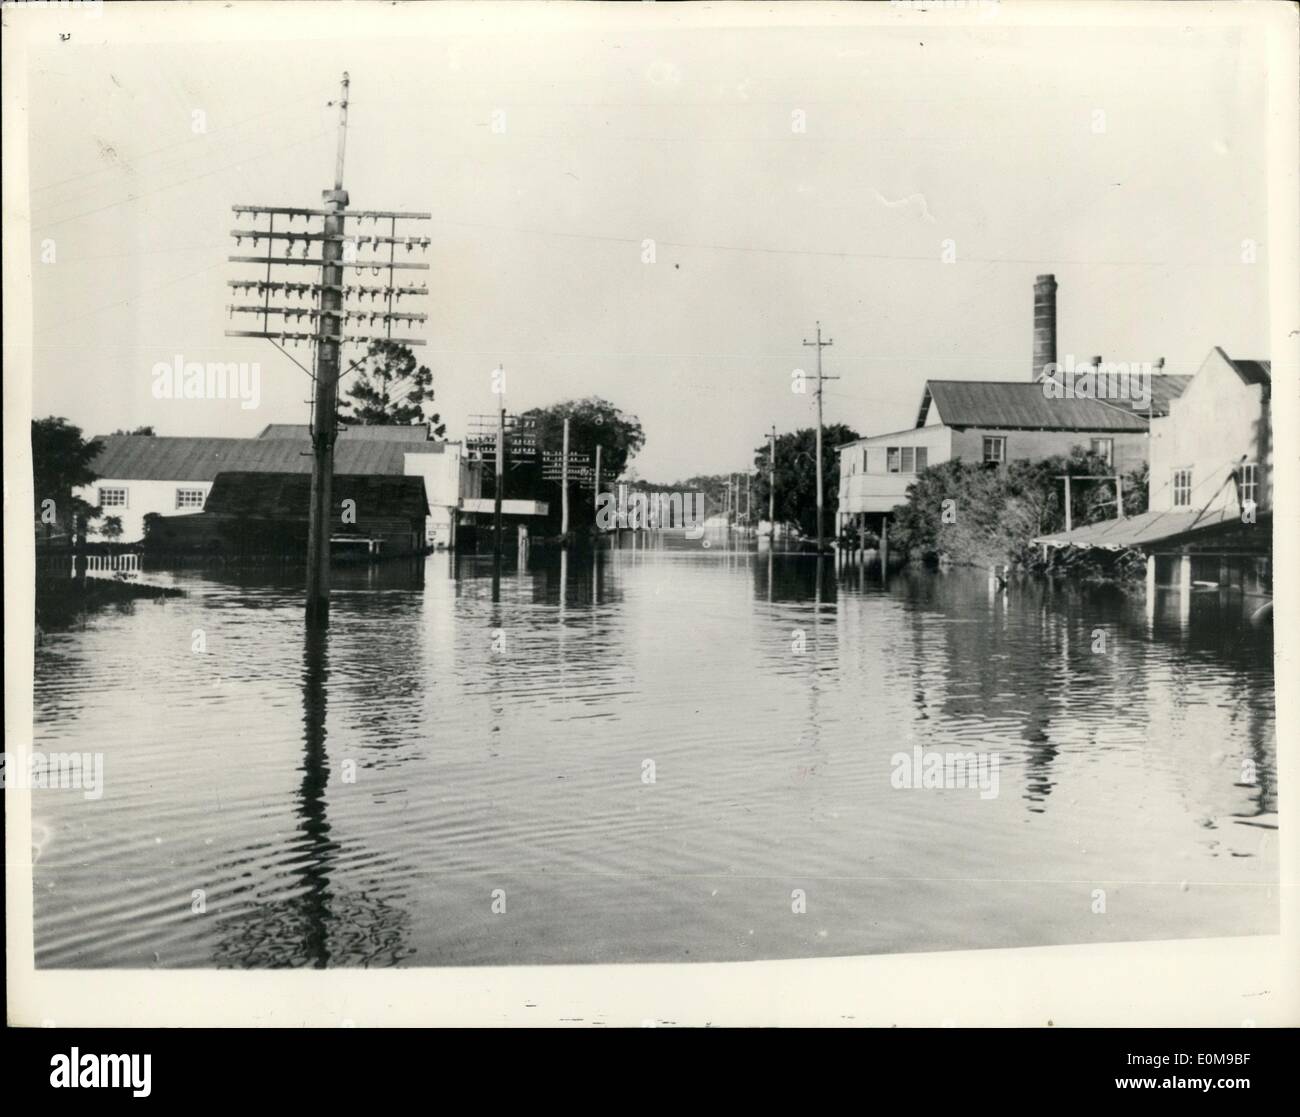 Mar. 03, 1954 - Vast Flood Damage In New South Wales. The Main Street Of Broadwater. Photo shows View of the flooded mainstreet Stock Photo